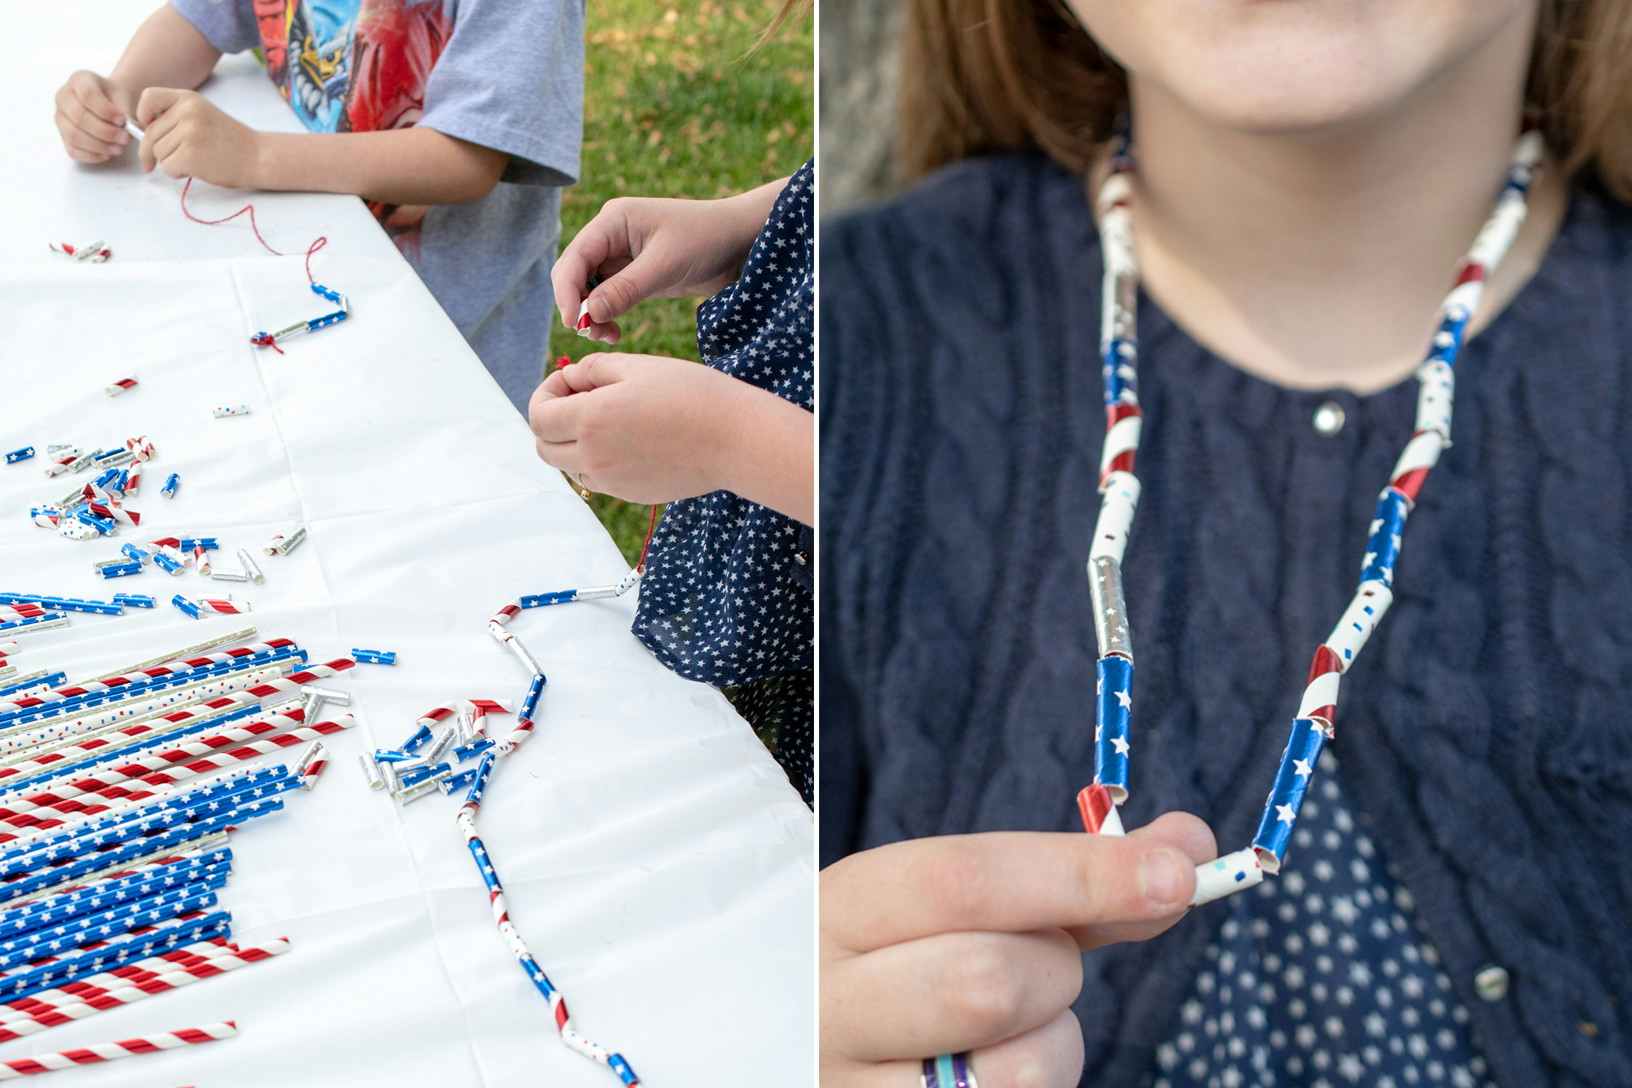 Two kids sitting at a table outside and making DIY necklaces using cut-up, red, white, and blue patterned paper straws and string.